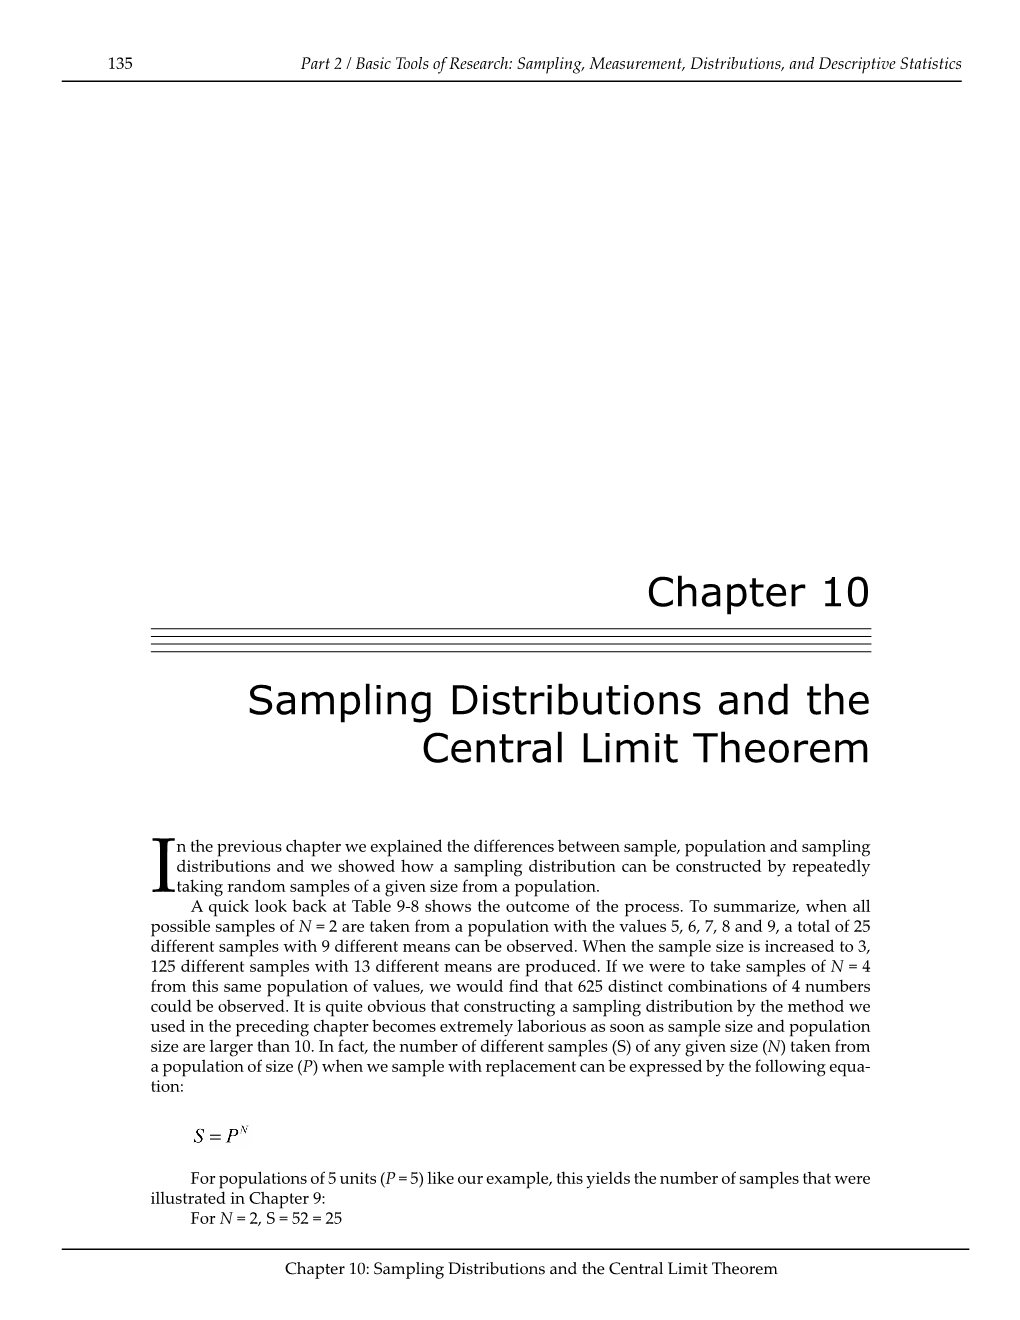 Chapter 10 Sampling Distributions and the Central Limit Theorem